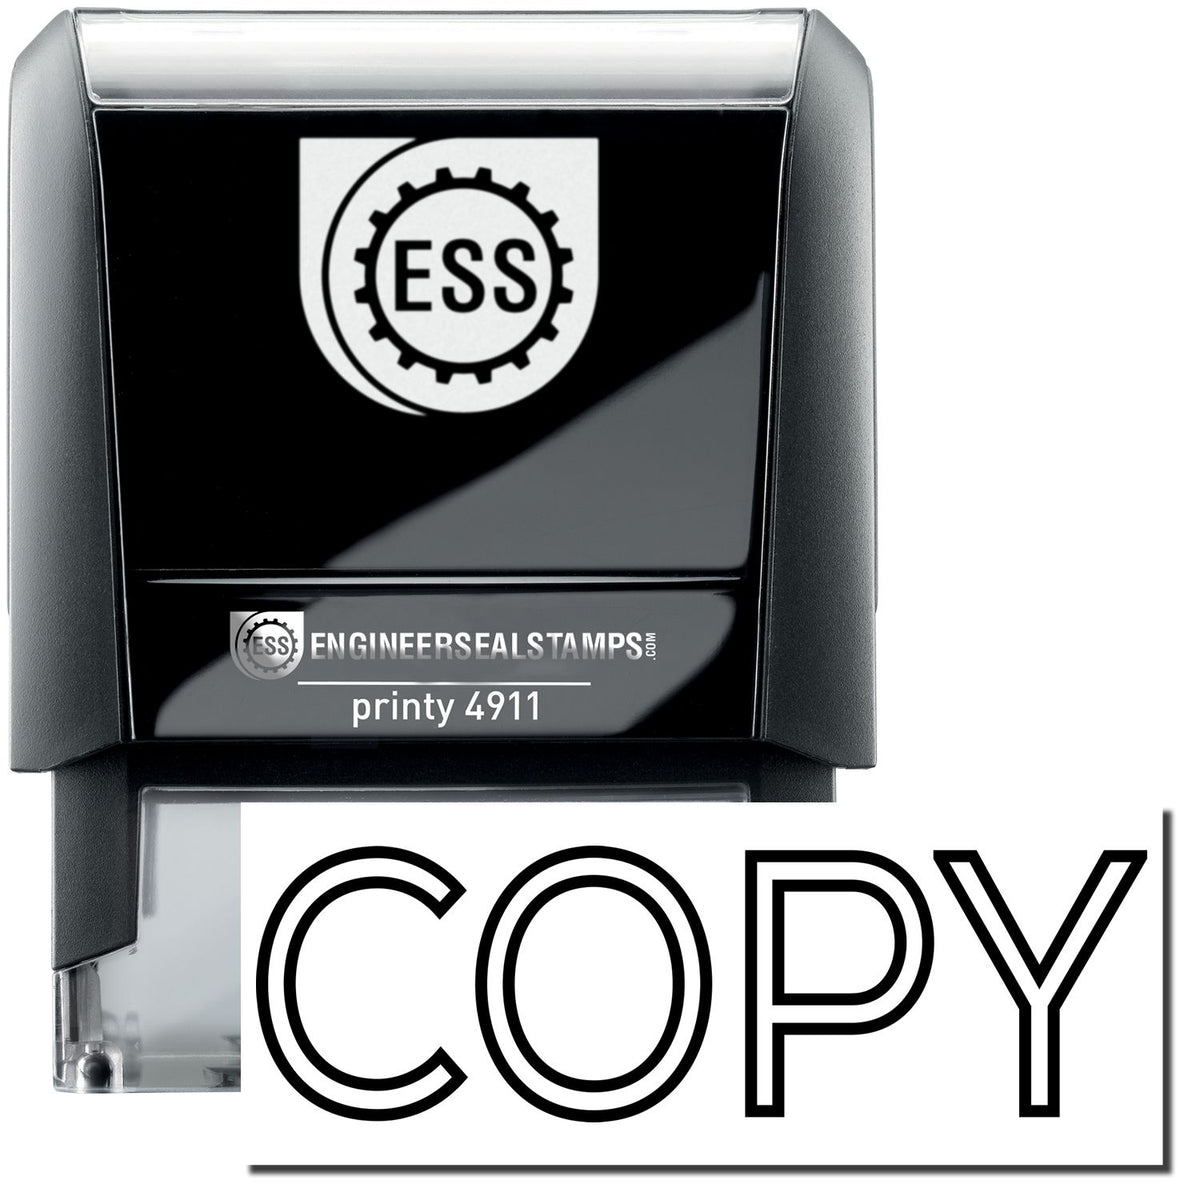 A self-inking stamp with a stamped image showing how the text &quot;COPY&quot; in an outline style is displayed after stamping.